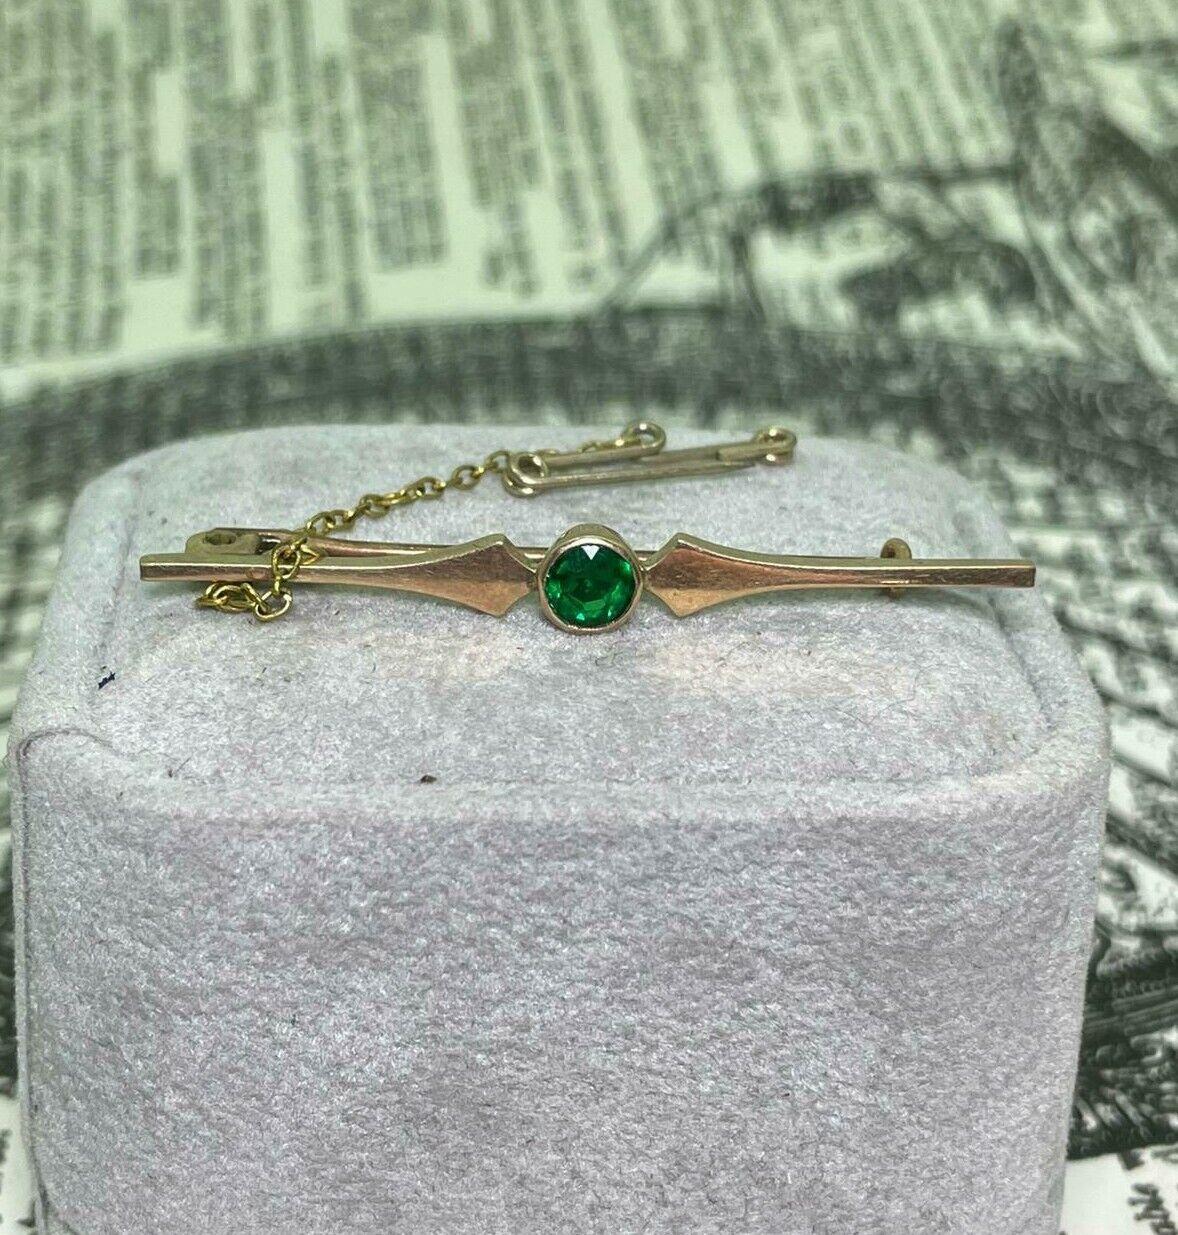 Beautifully crafted in 9K Gold (stamped 9ct)
this stunning Bar Brooch 
is of timeless & classic design
dating from Art-Deco (c1930's) period
 
It centers a bezel set Gilson Synthetic Emerald
of gorgeous vibrant green colour
set within simple